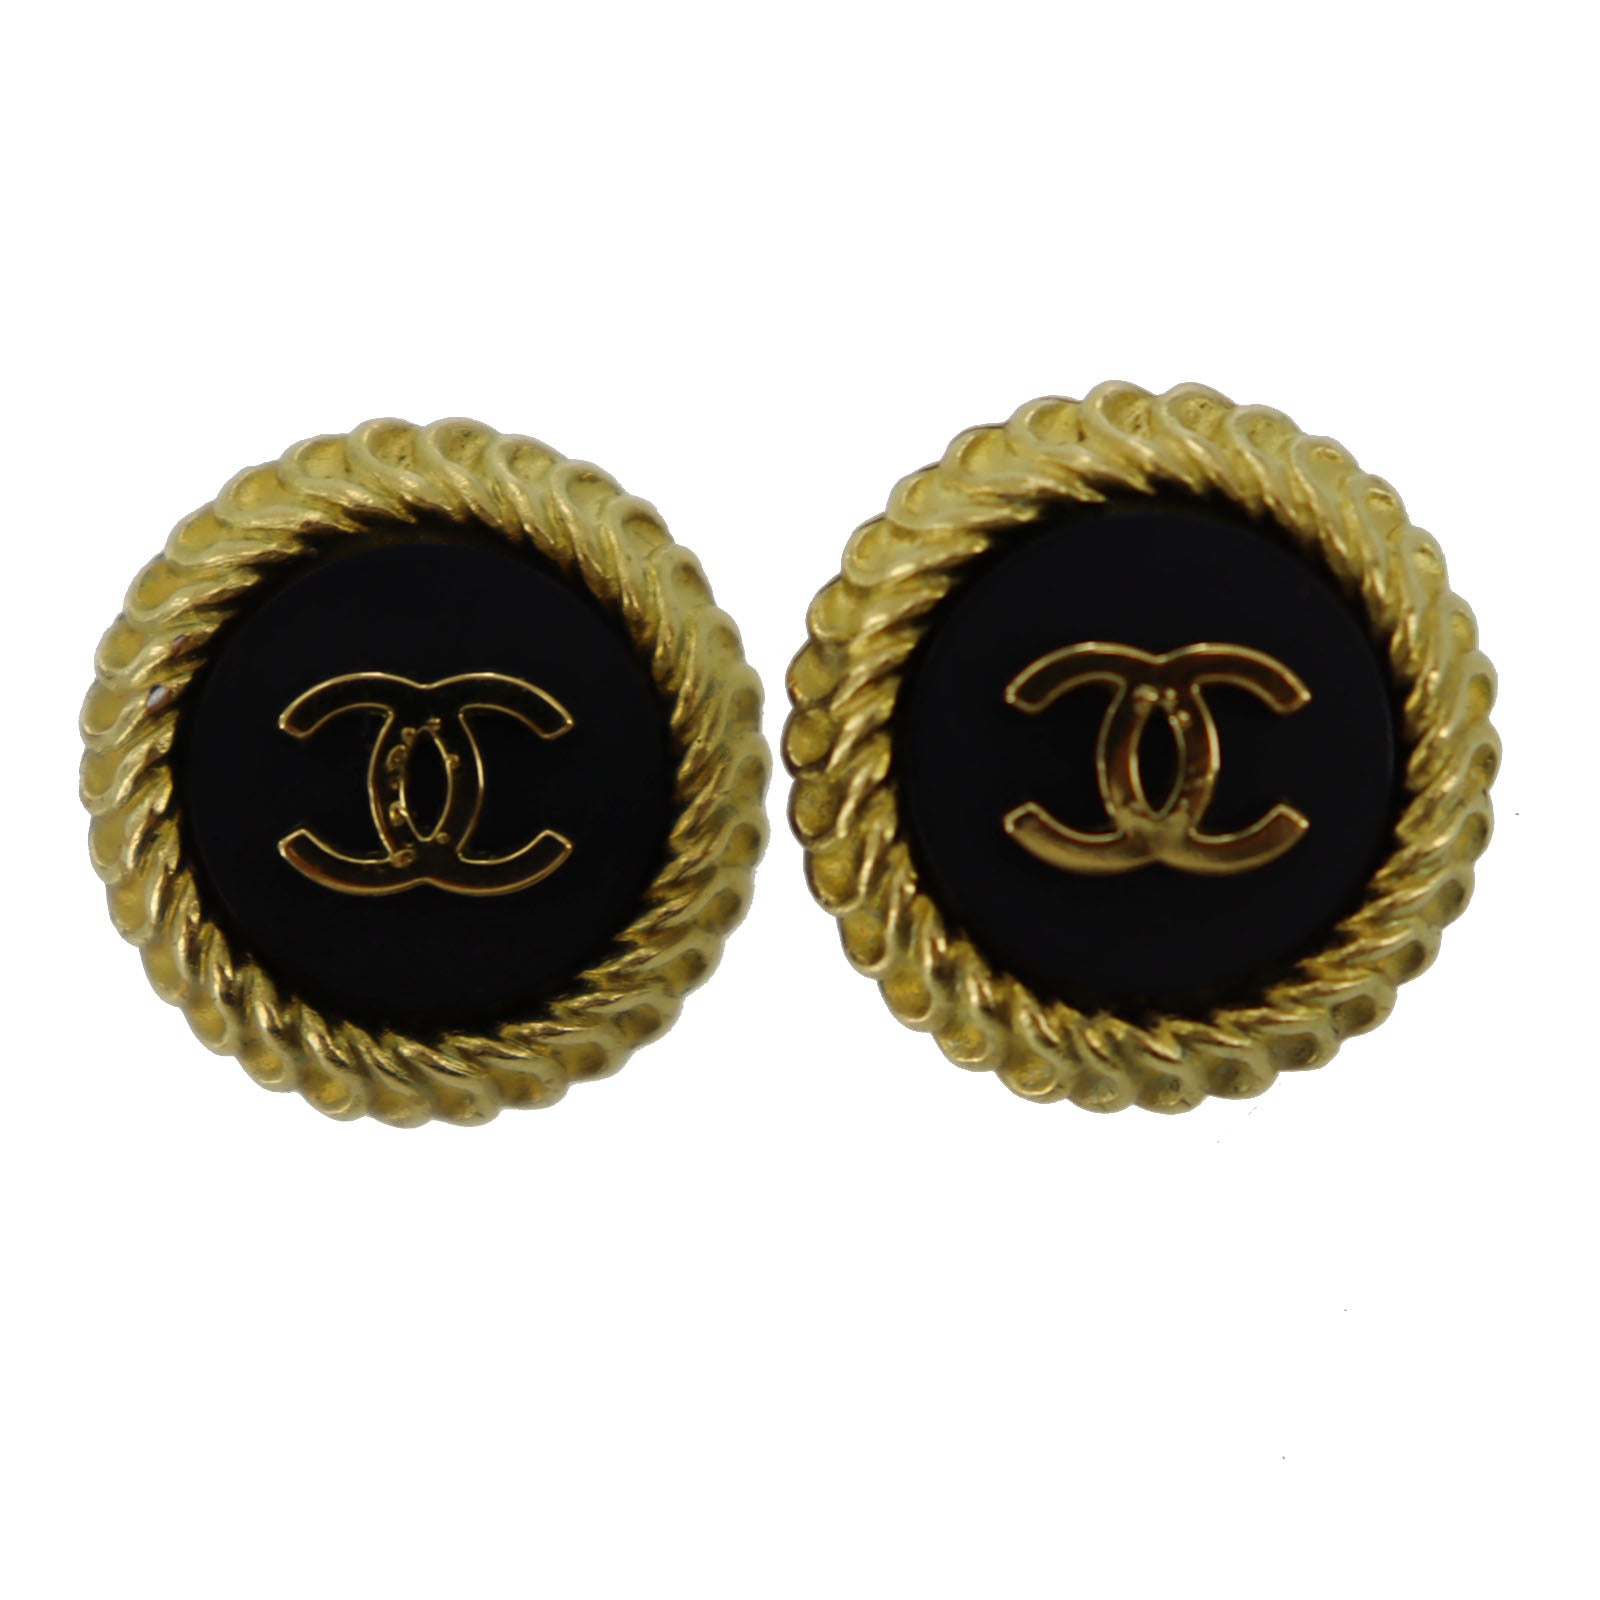 Chanel Earrings Gold Black Clip-On 160754 - 2 Pieces